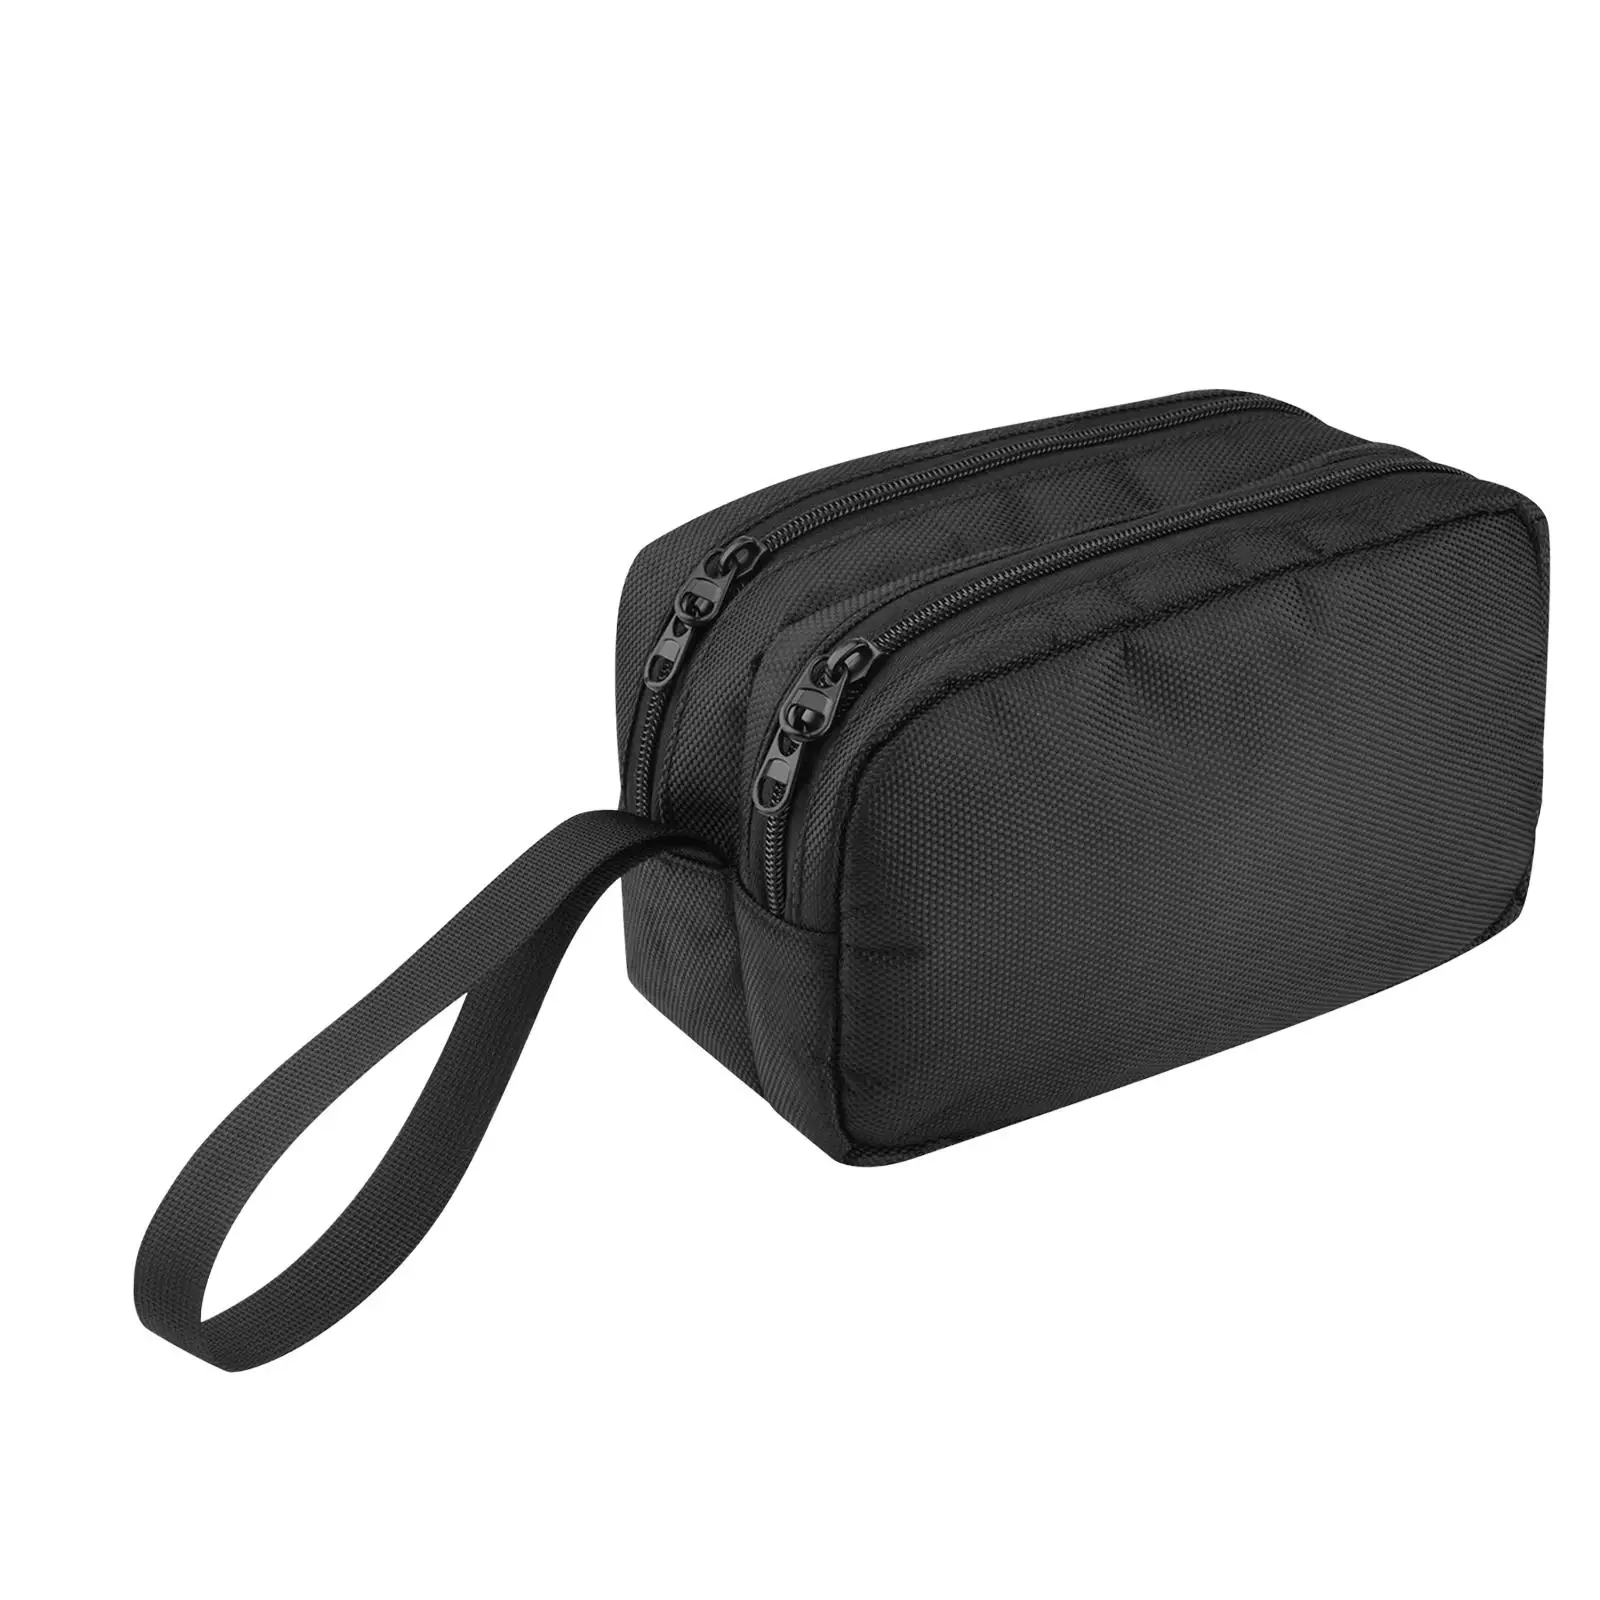 Black Carrying Case Multifunction Bag Wear Resistant Travel Cable Organizer Bag